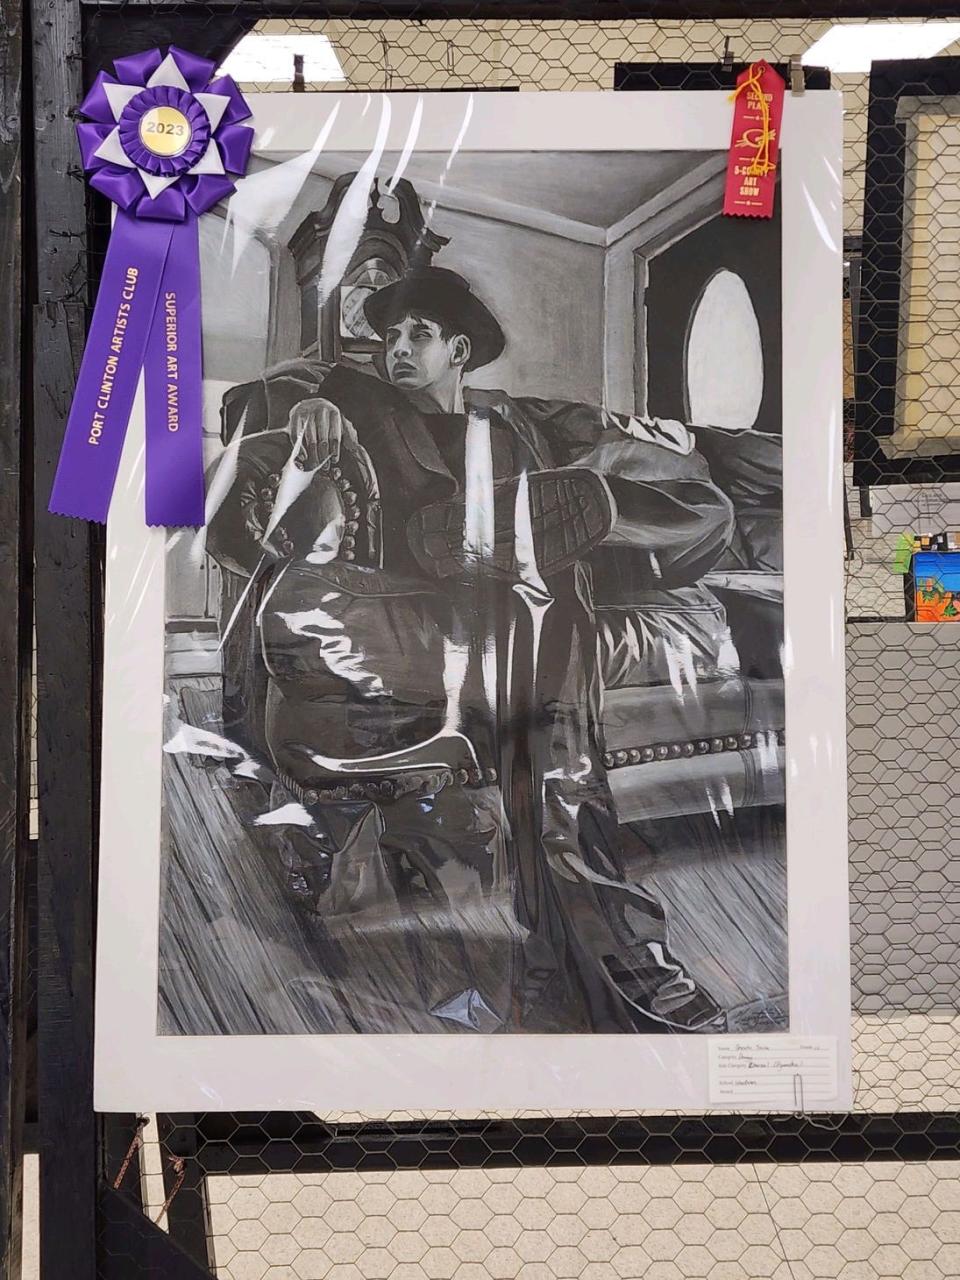 Quentin Trevino, a Woodmore High School, received a Superior award for his charcoal drawing.